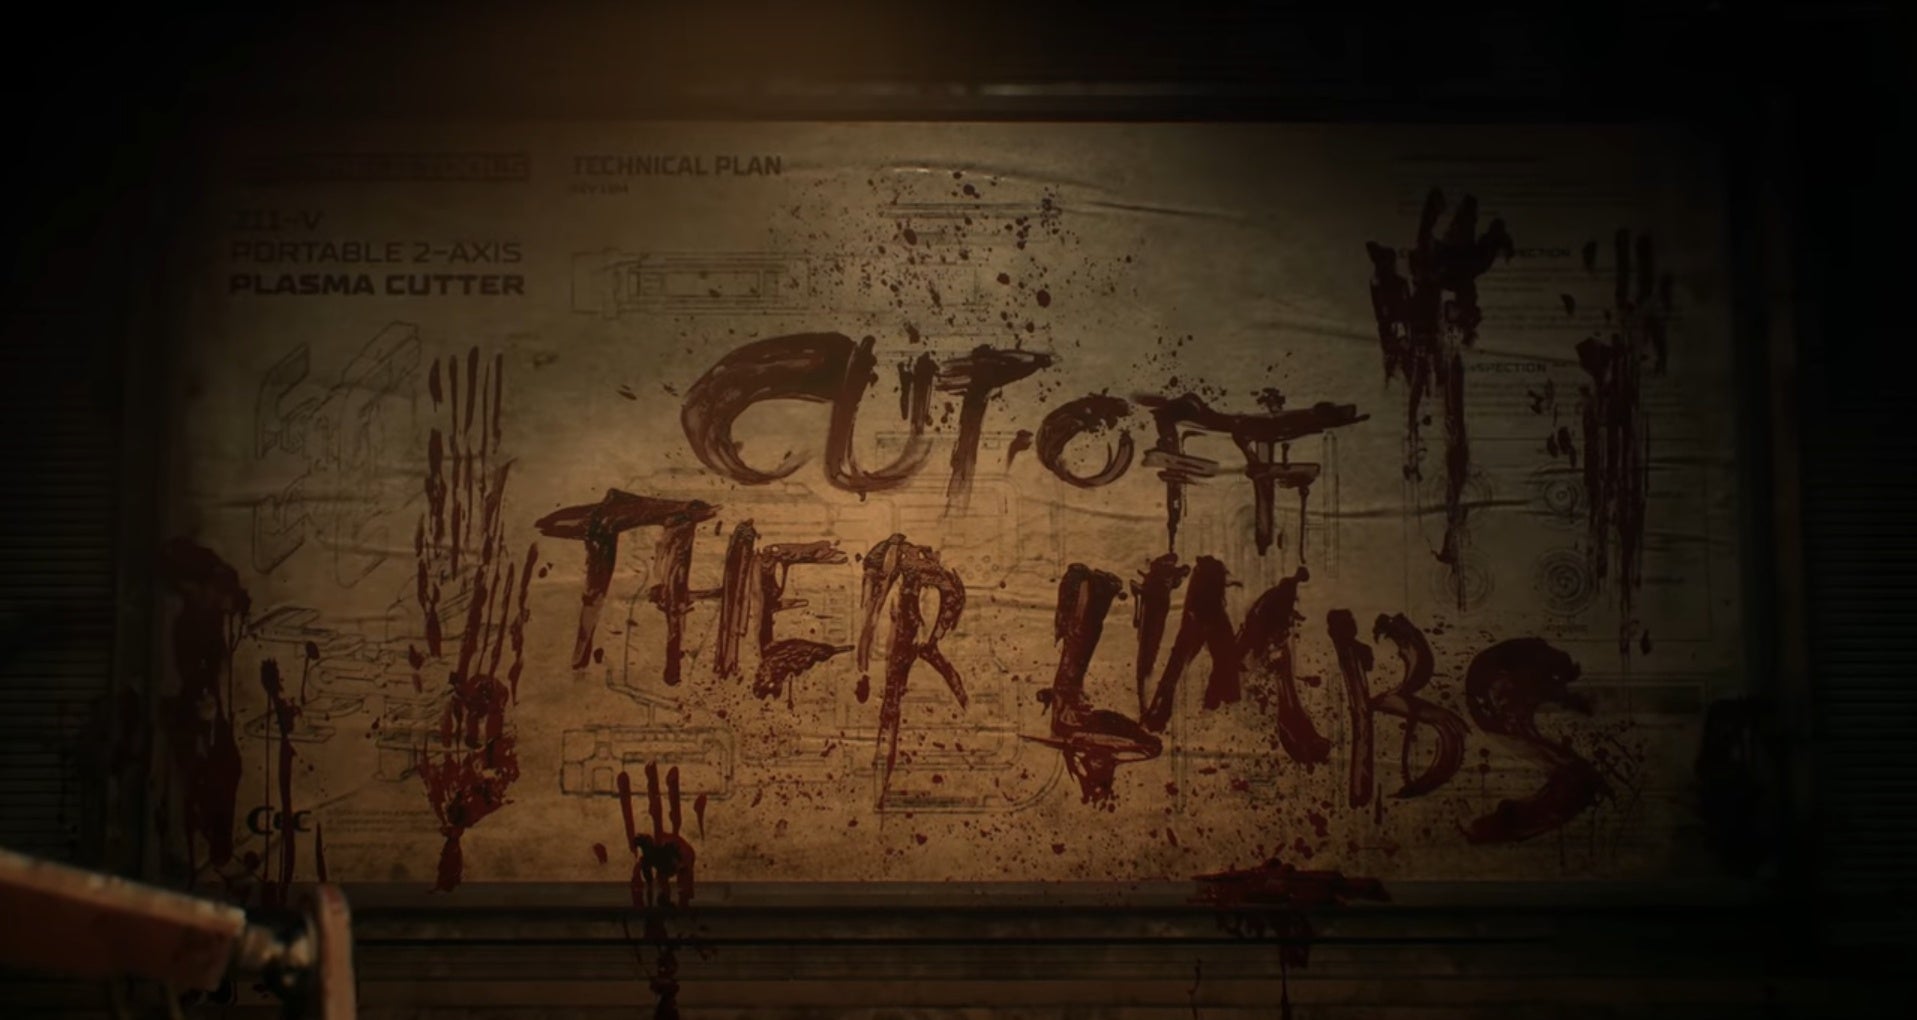 A still from the Dead Space remake reveal trailer, showing the words "Cut off their limbs" scrawled on a wall in blood by a person who presumably had lost their pen.